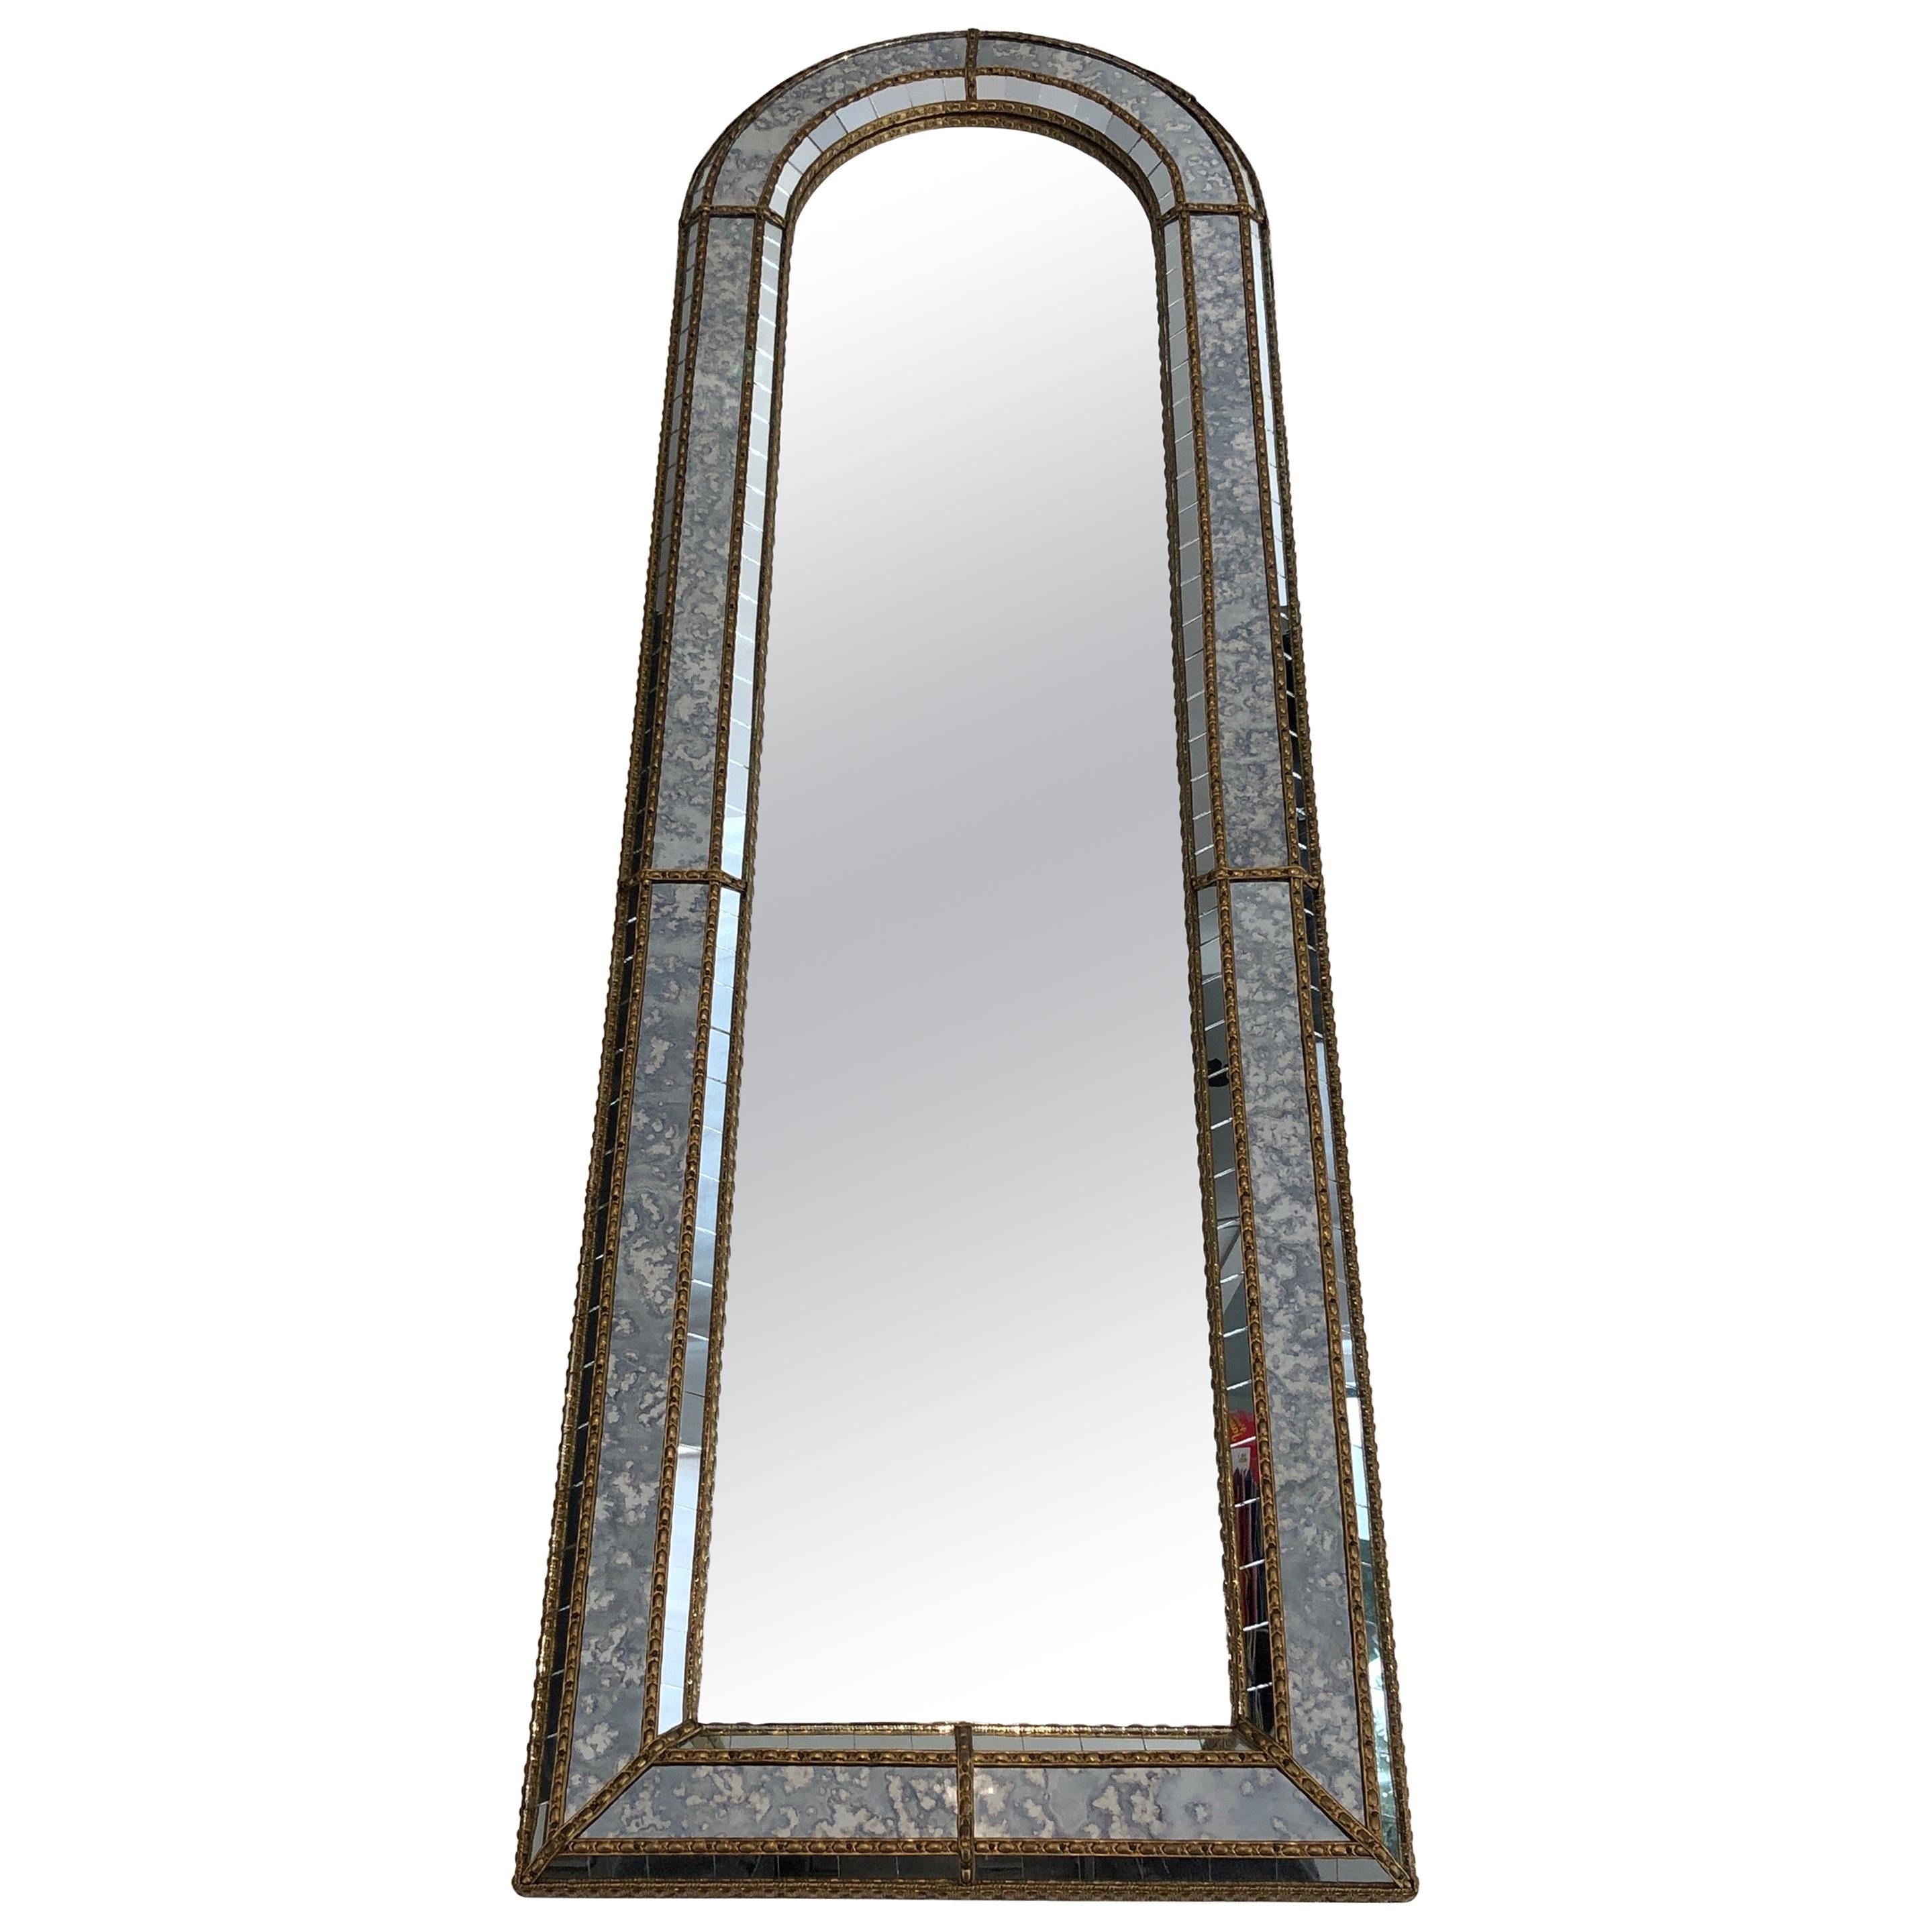 Multi-Facets Mirror Rounded on Top with Brass Garlands, French, Circa 1970